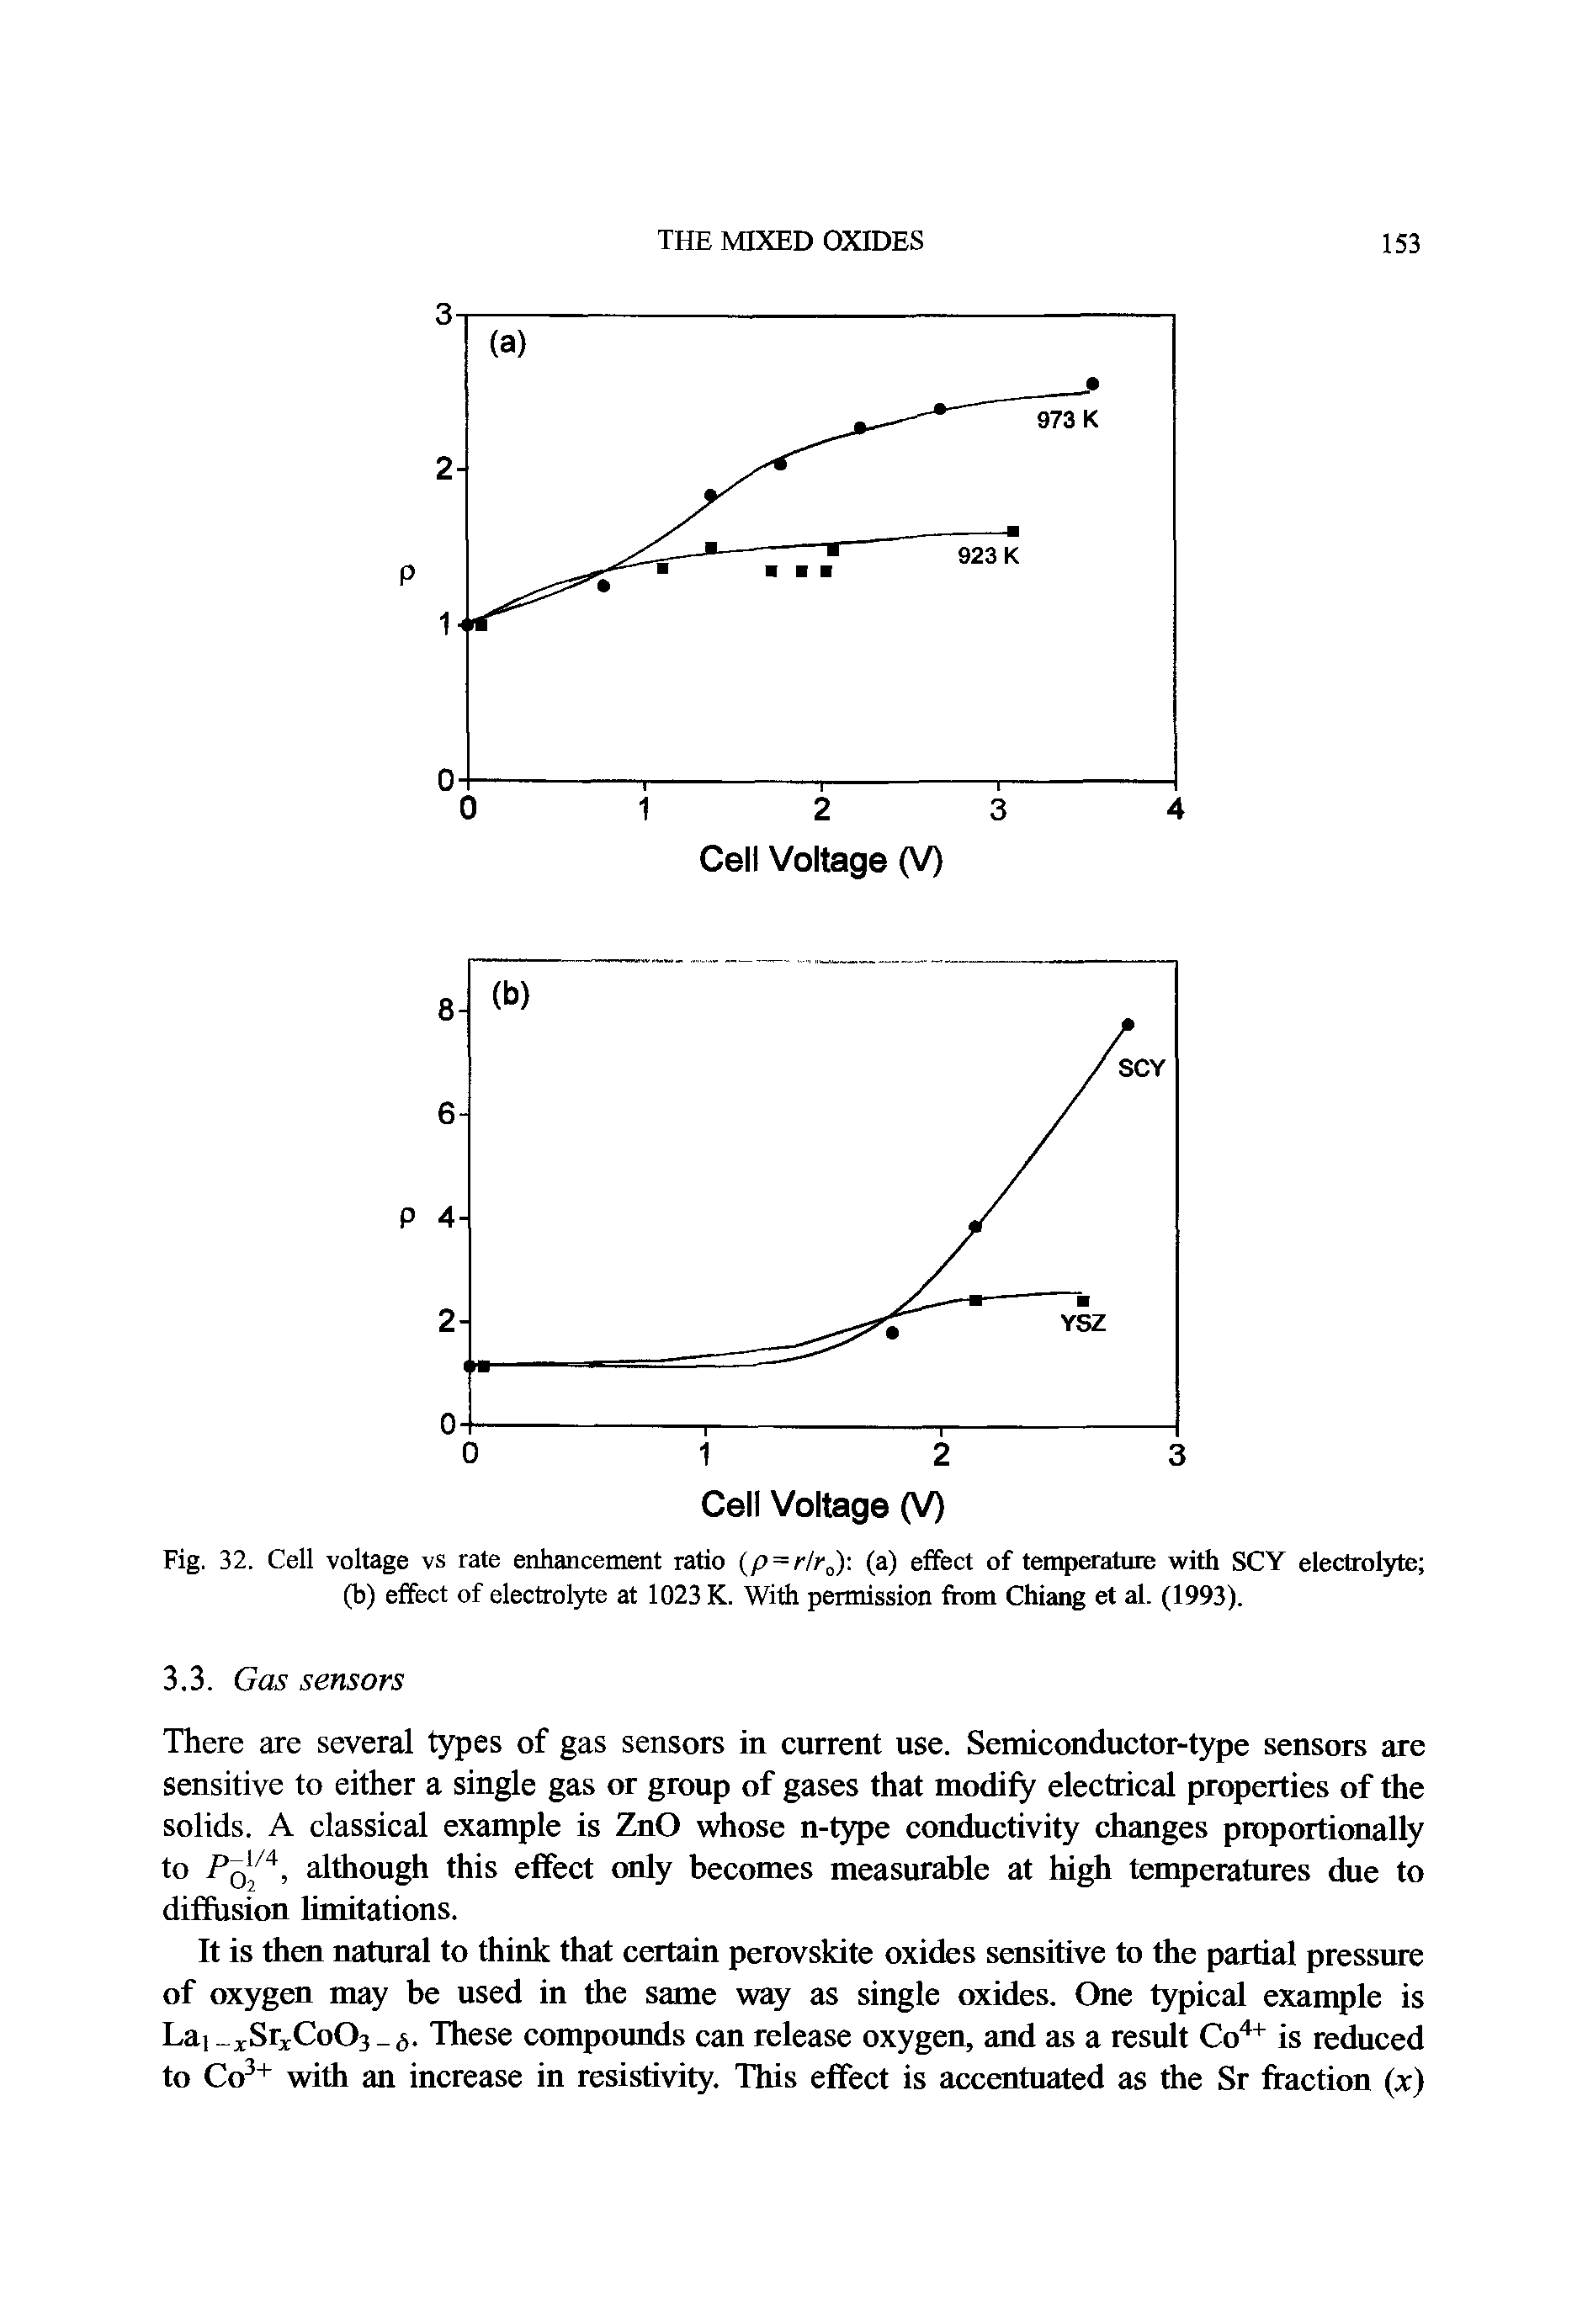 Fig. 32. Cell voltage vs rate enhancement ratio (p = r/r0) (a) effect of temperature with SCY electrolyte (b) effect of electrolyte at 1023 K. With permission from Chiang et al. (1993).